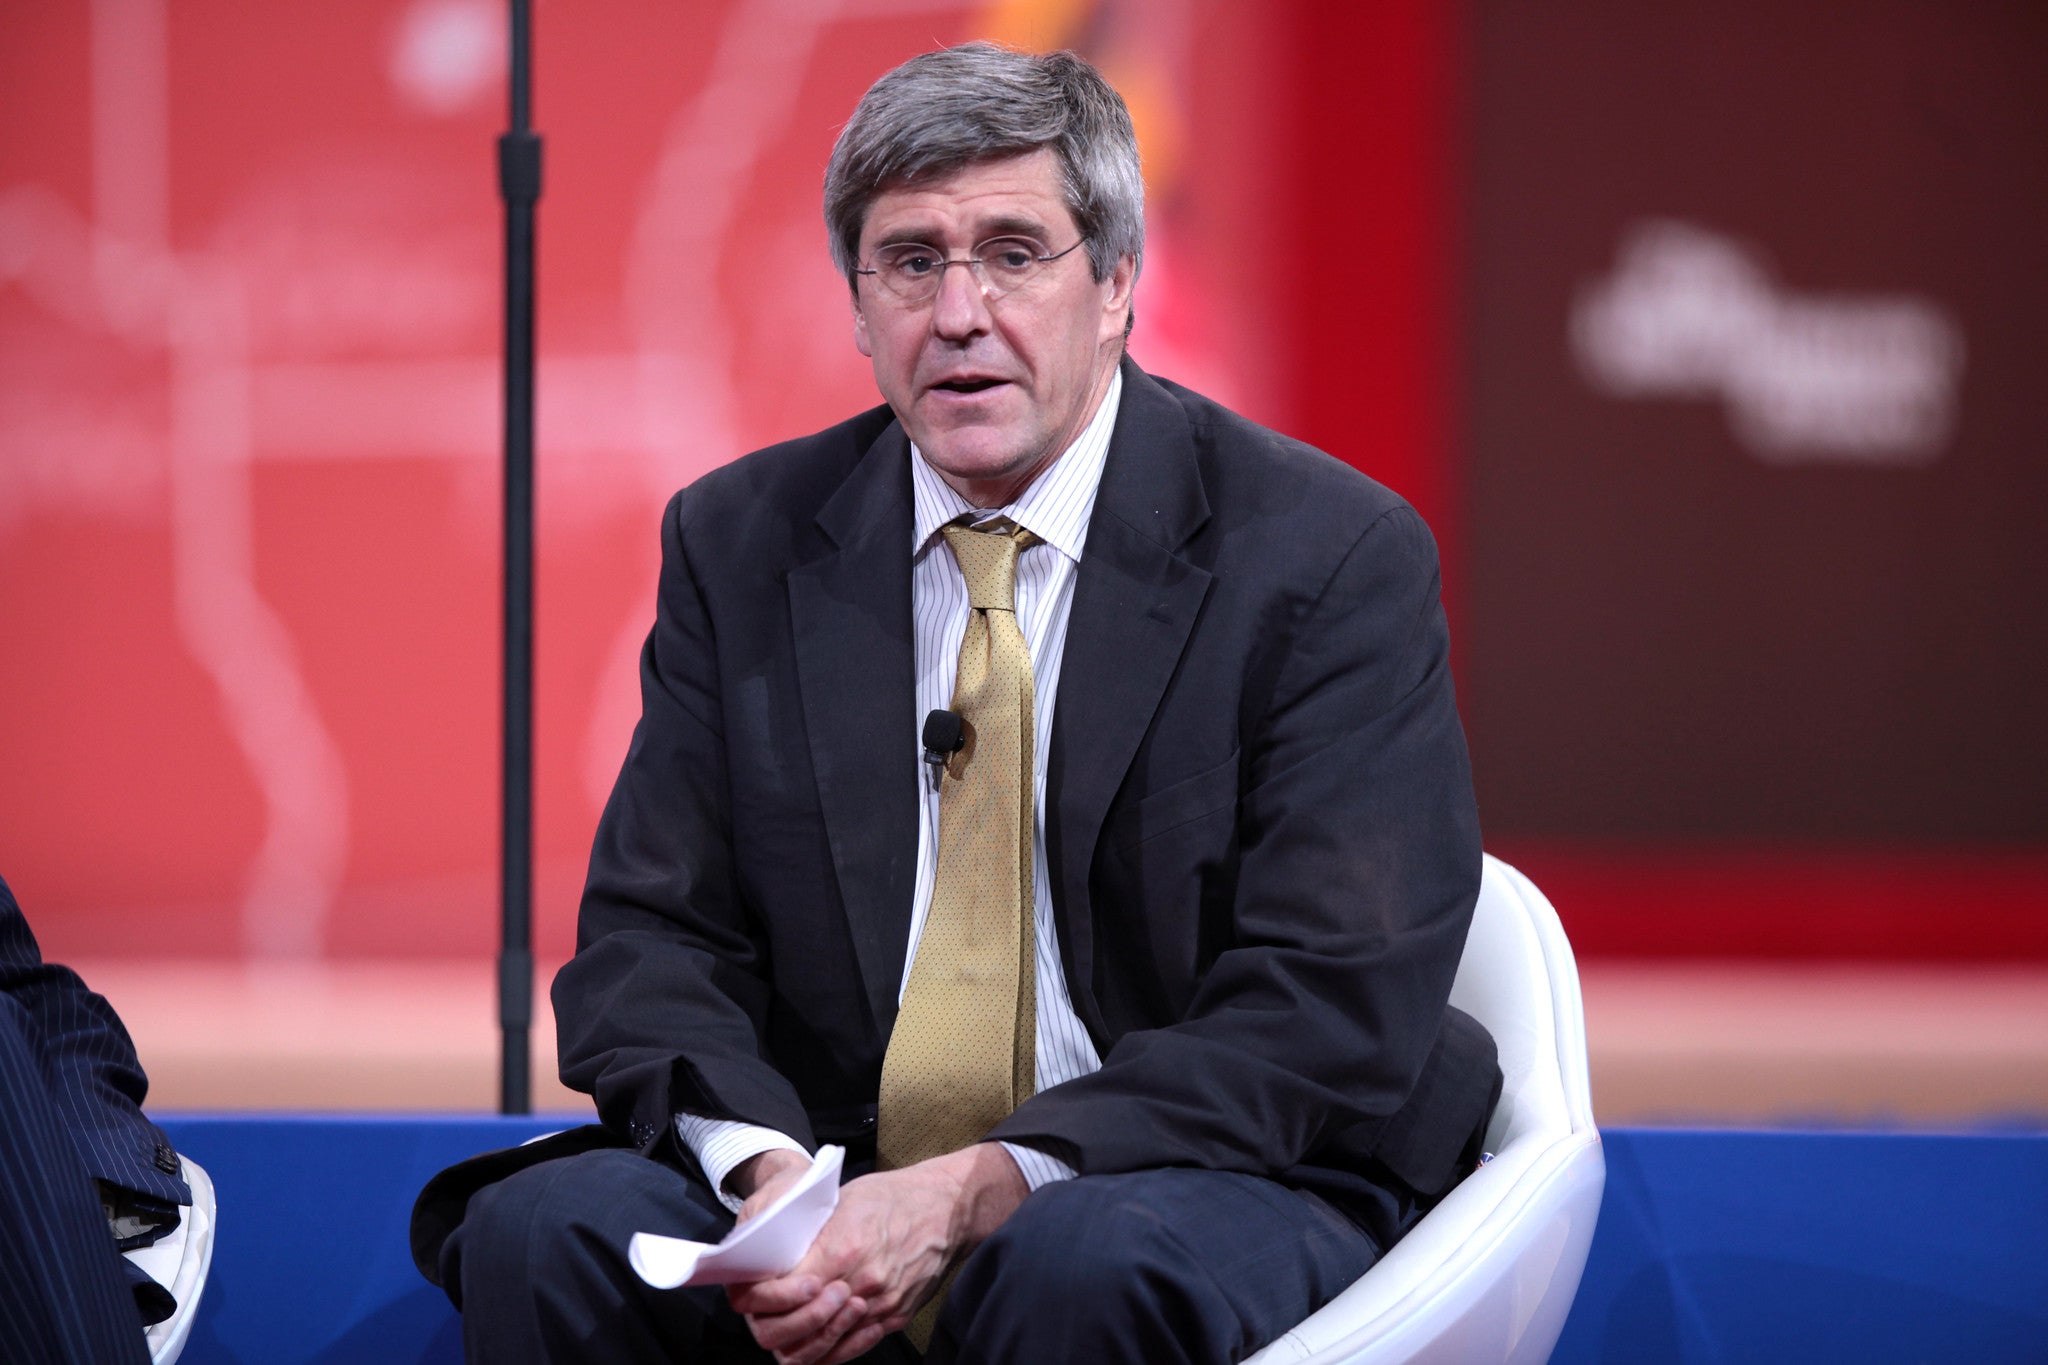 Stephen Moore onstage at the 2015 Conservative Political Action Conference.